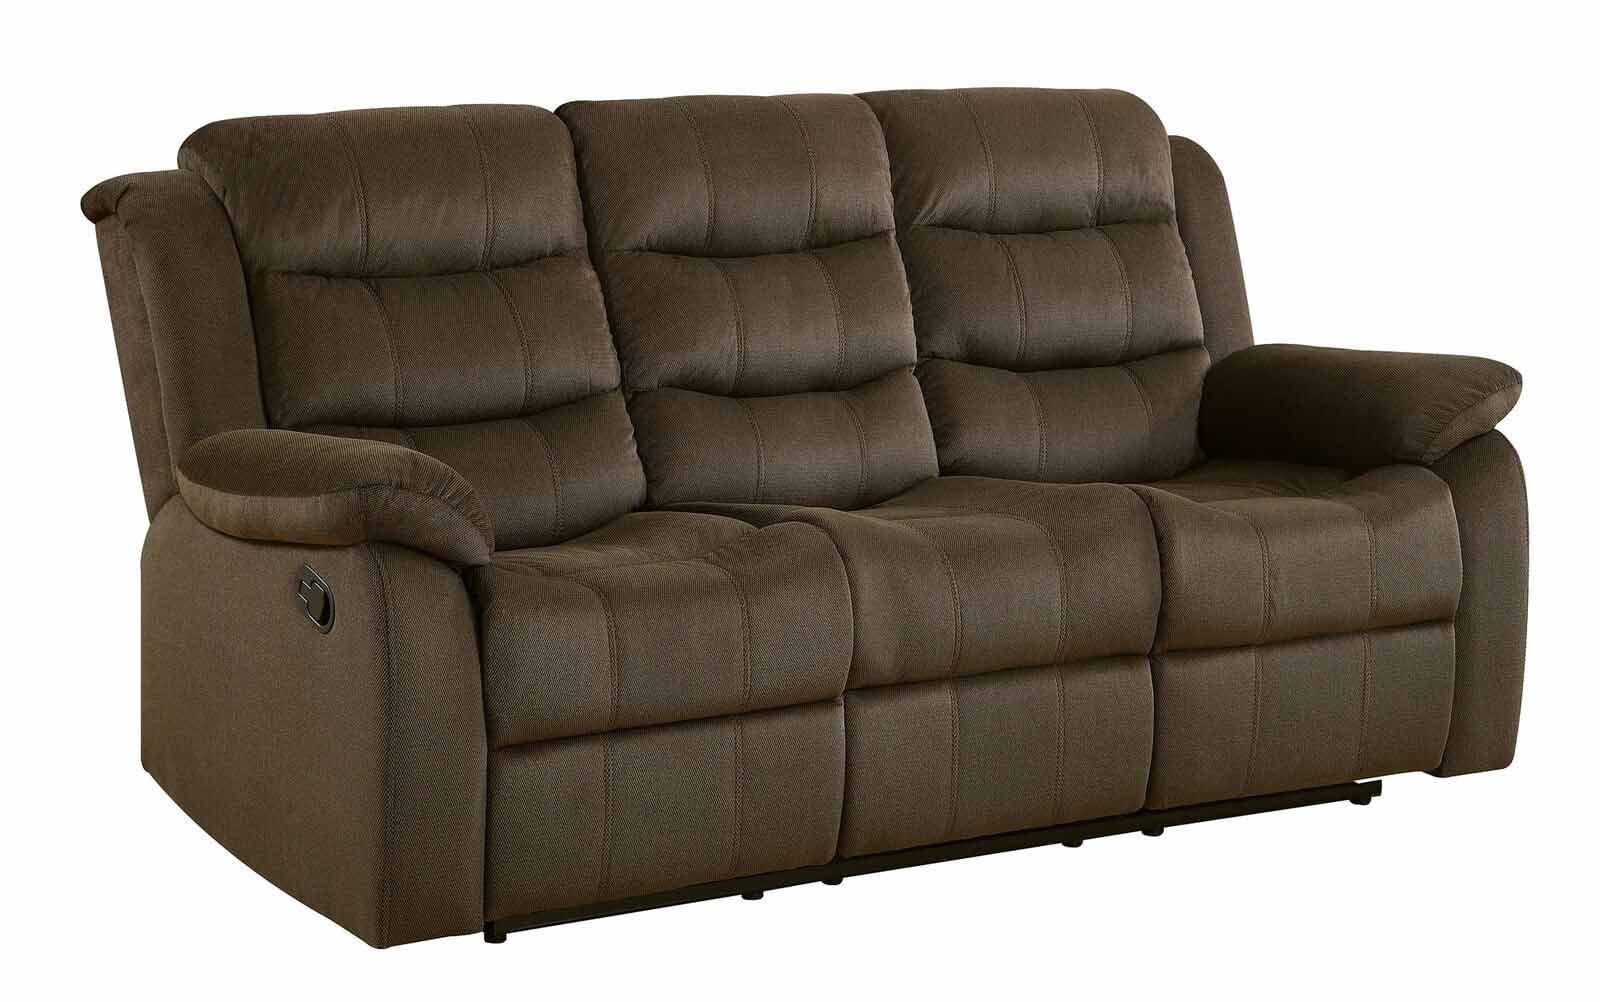 Transitional Chocolate Velvet Reclining Sofa with Pillow-Top Arms